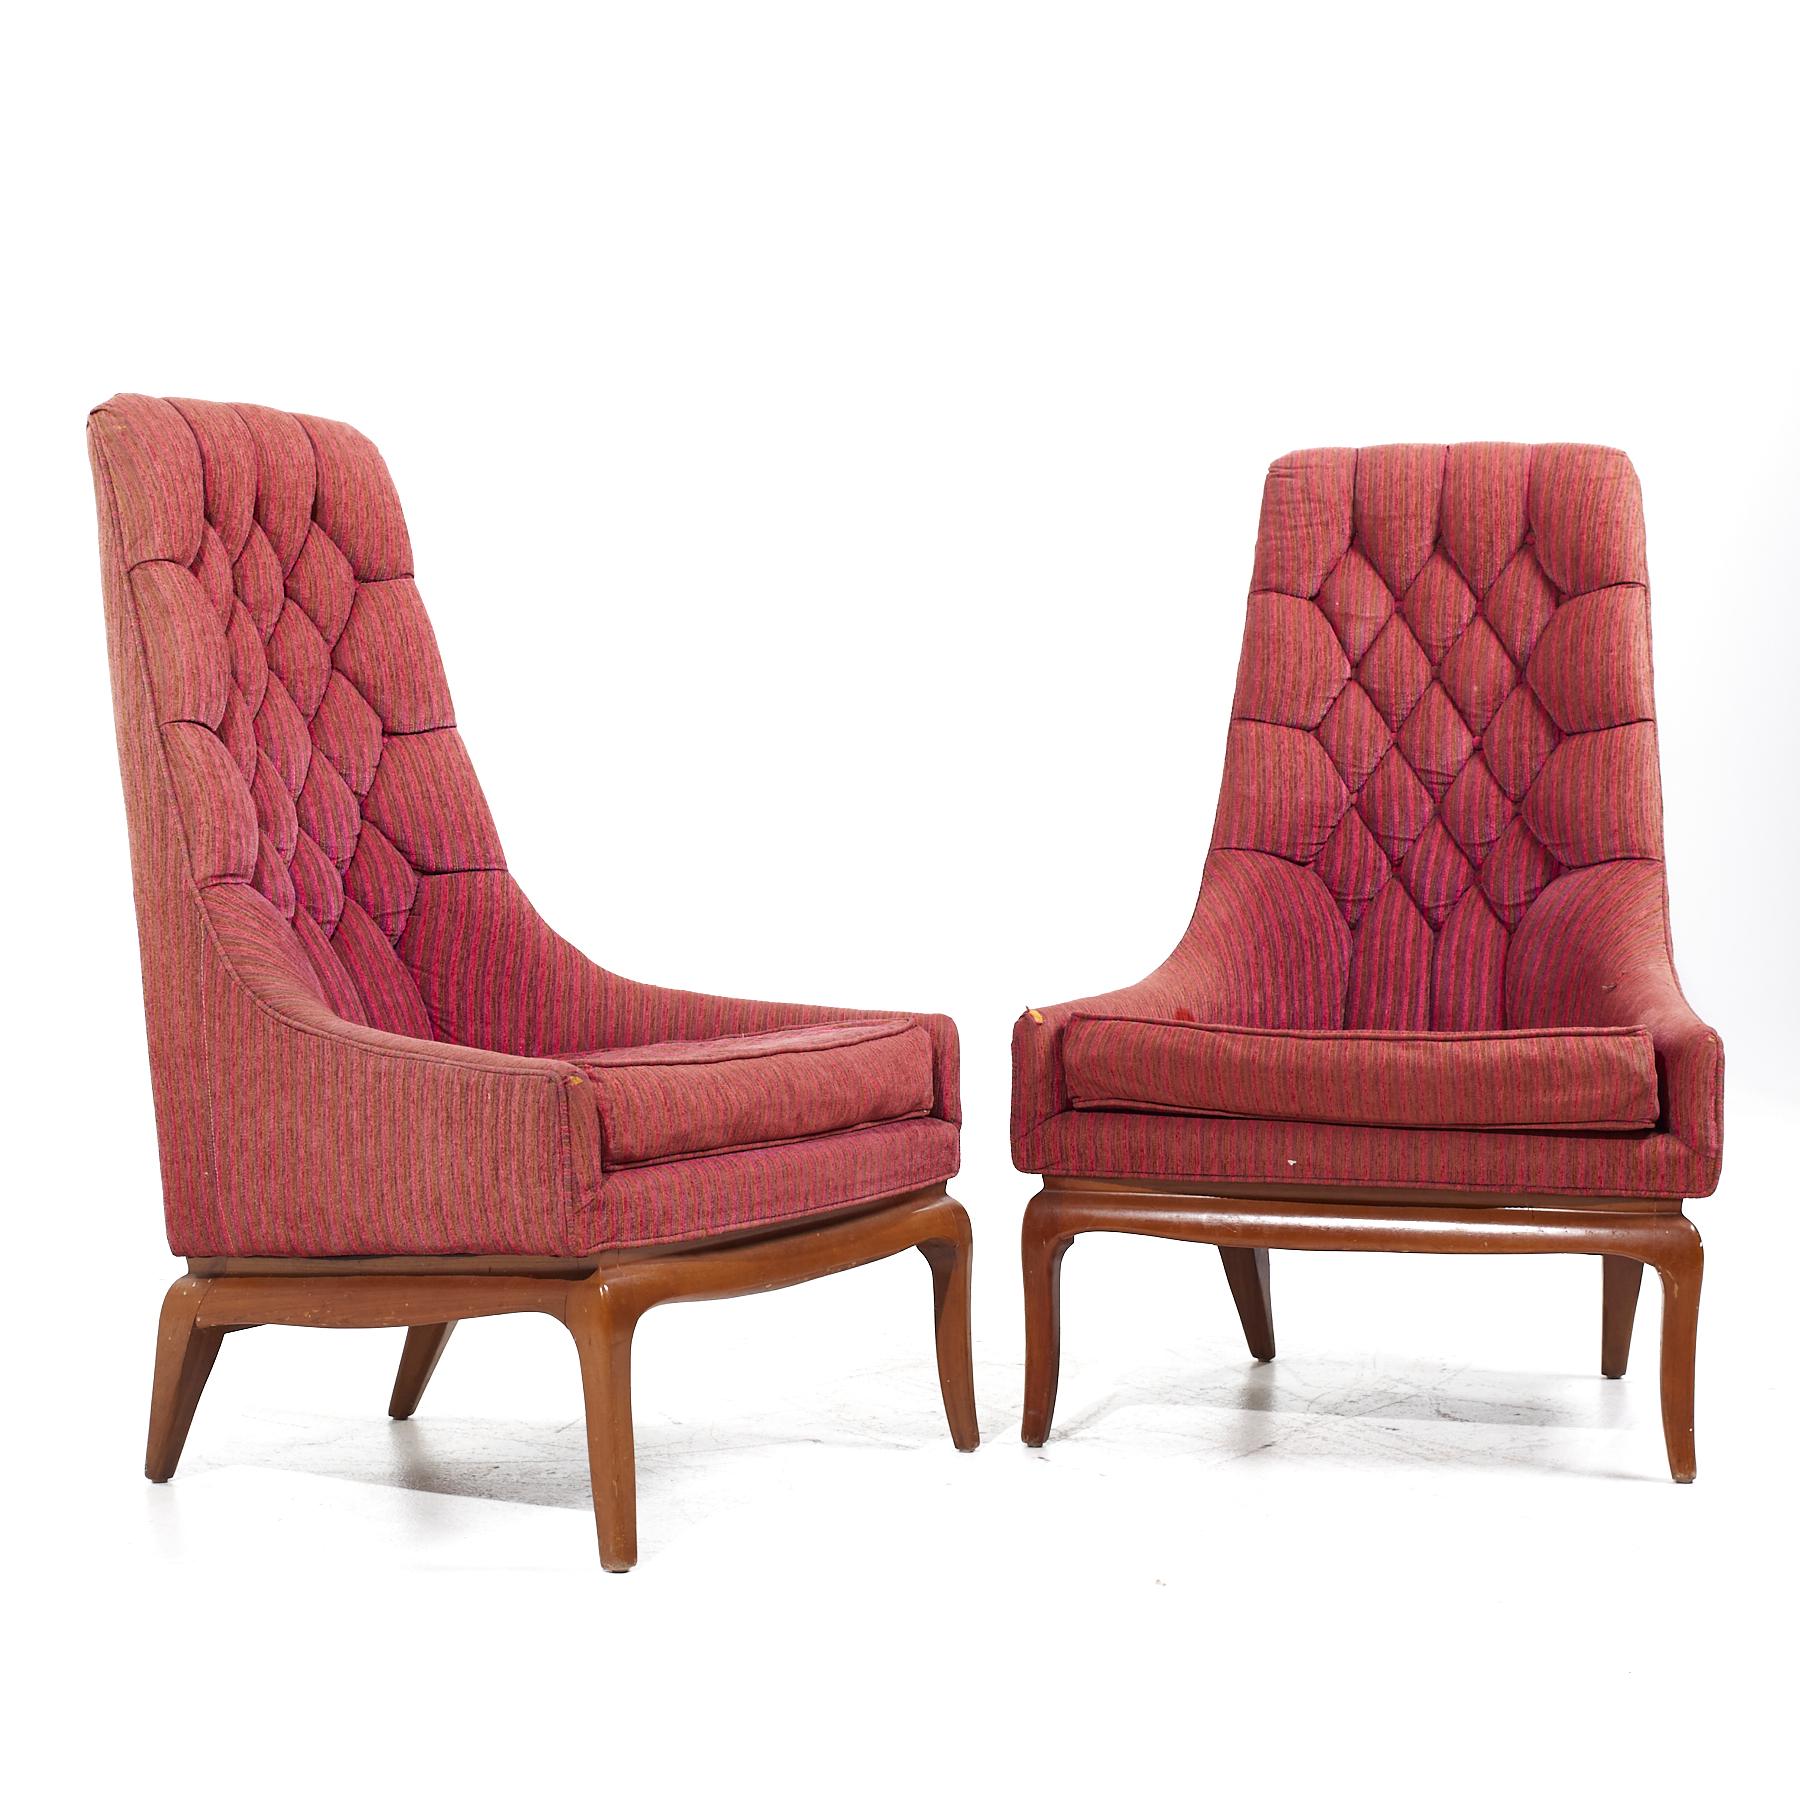 T.H. Robsjohn Gibbings for Widdicomb Mid Century Highback Lounge Chairs - Pair

Each lounge chair measures: 27.25 wide x 24.75 deep x 41 high, with a seat height of 16.5 inches

All pieces of furniture can be had in what we call restored vintage